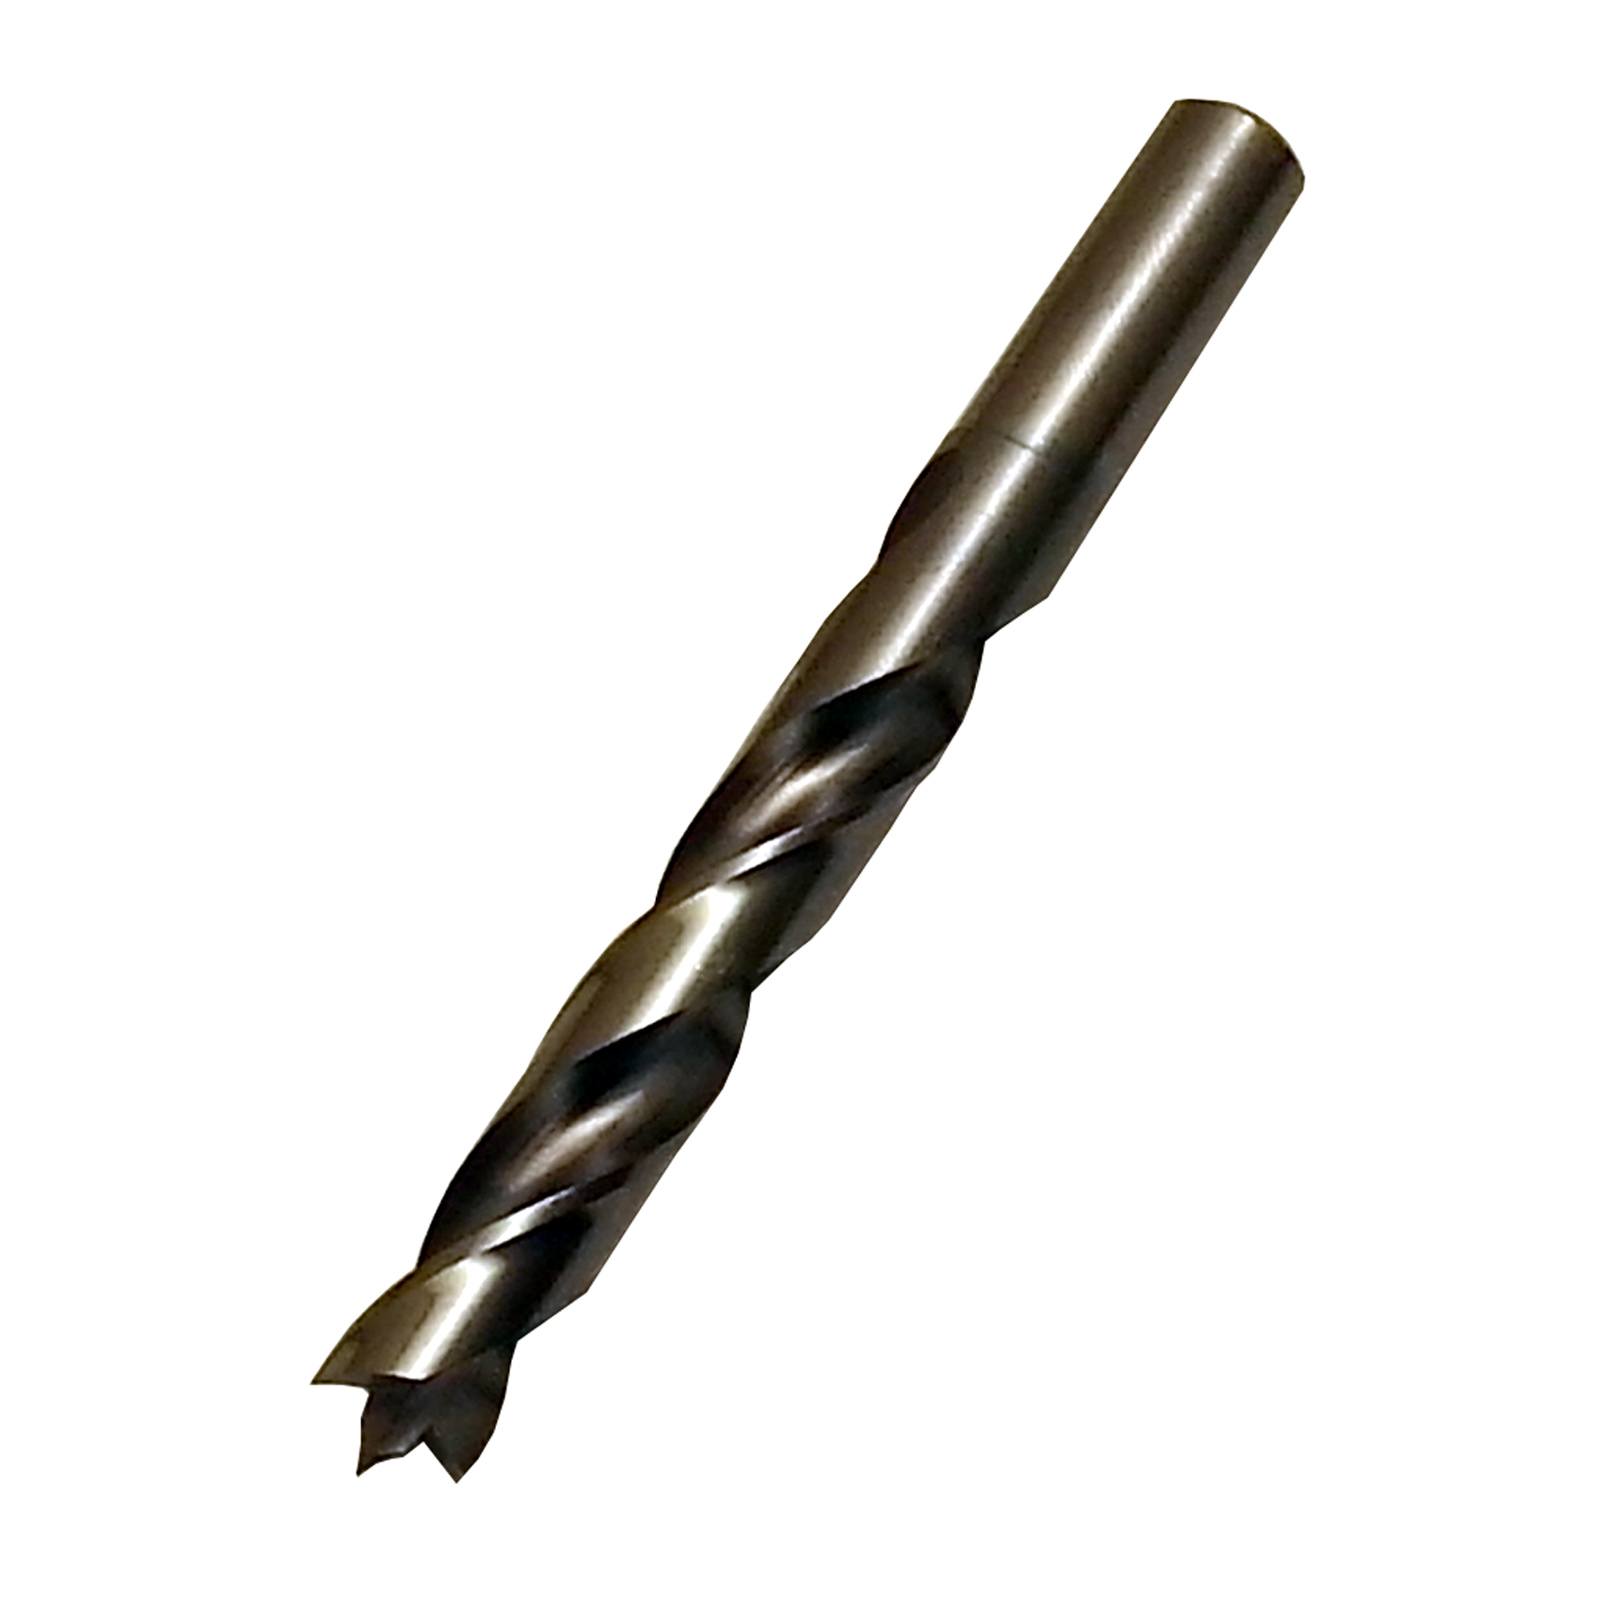 #37 Size Spiral Flute Black Oxide Finish Round Shank Pack of 12 118 Degrees Conventional Point Michigan Drill 300 Series High-Speed Steel Jobber Length Drill Bit 